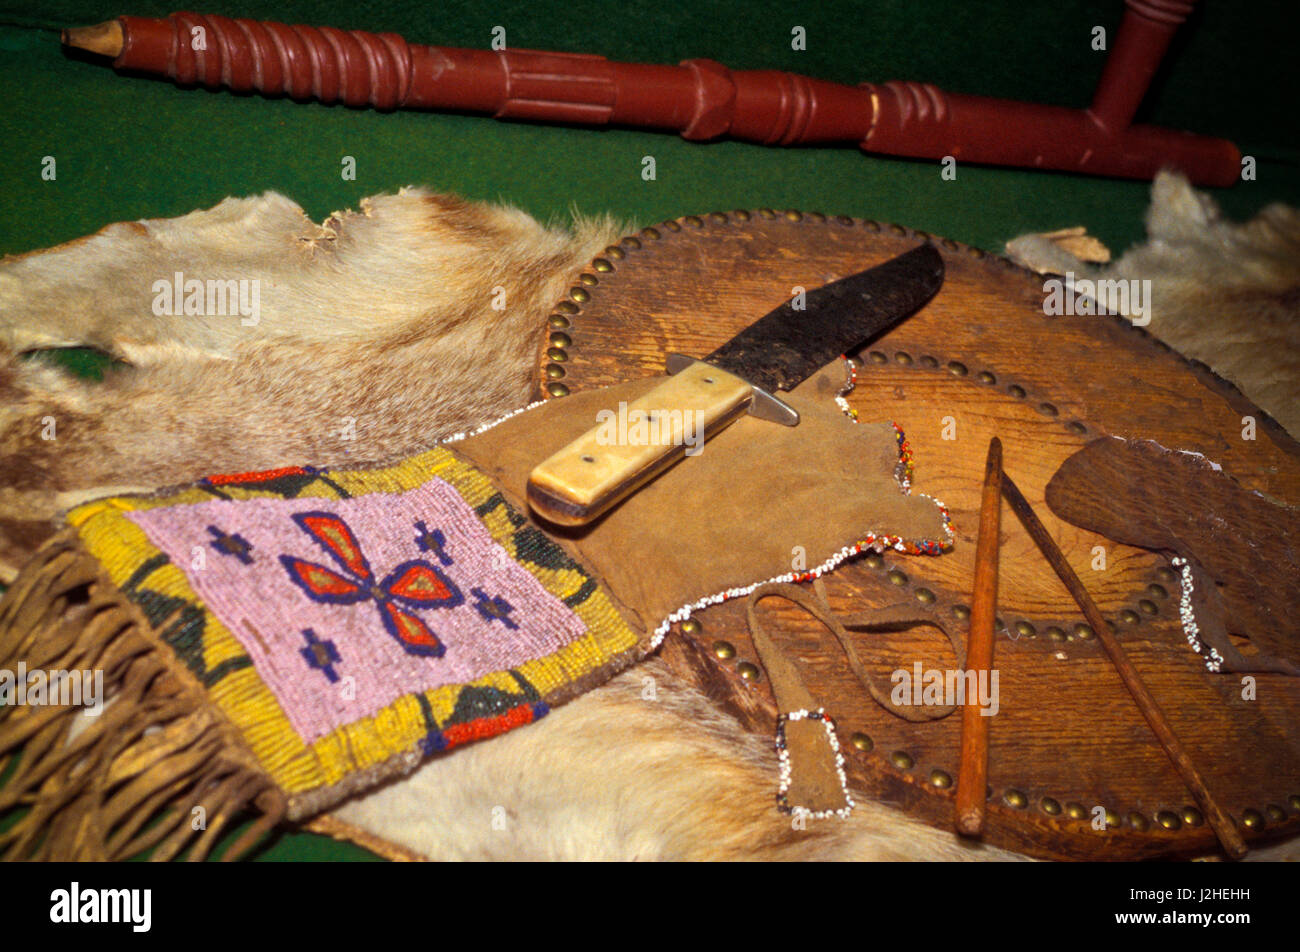 Museum of the Rockies Blackfeet red pipestone pipe and beaded bag with a board used to cut tobacco Stock Photo